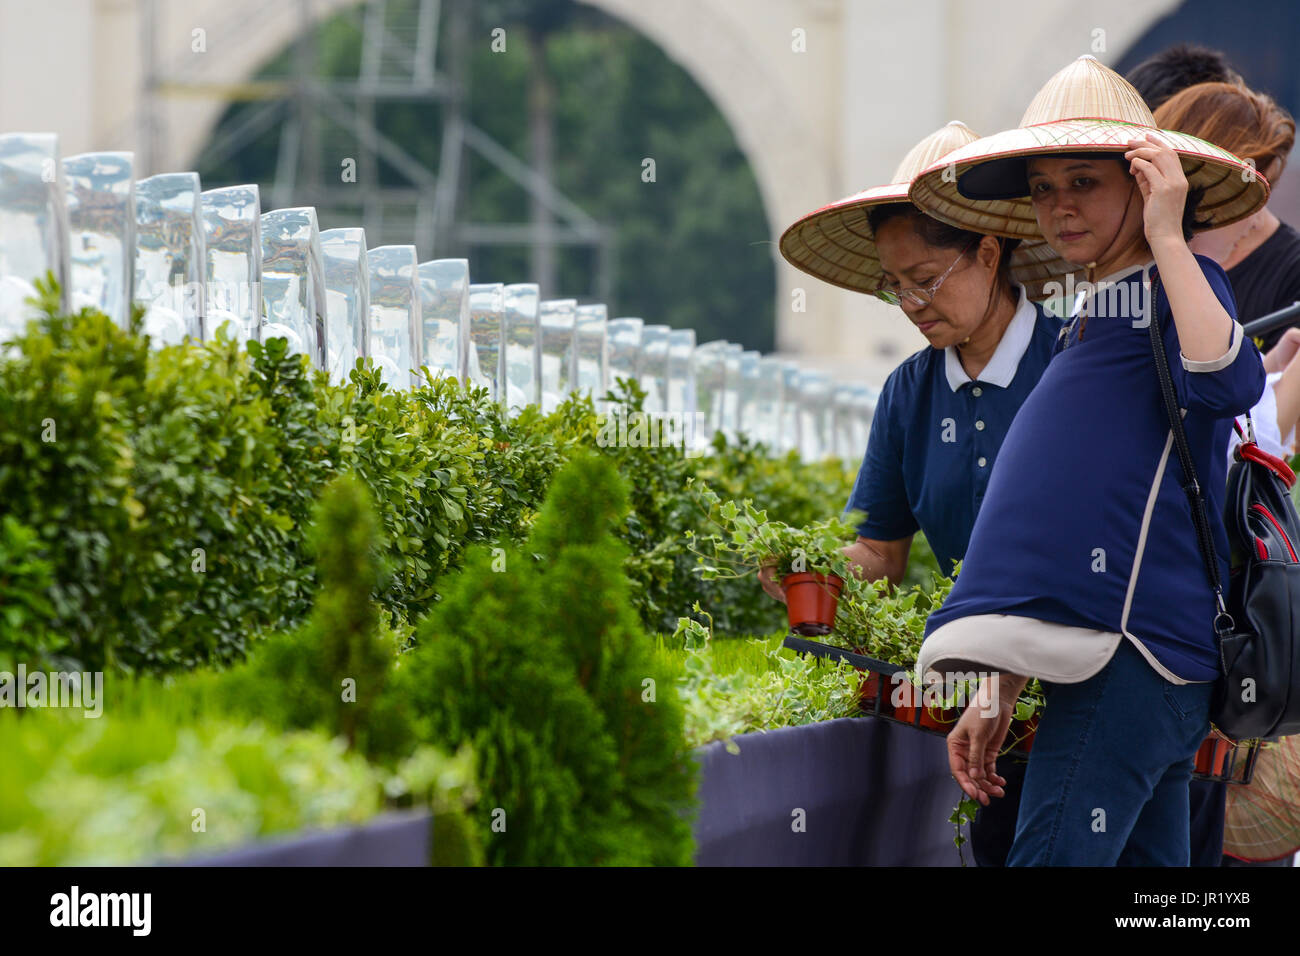 TAIPEI, TAIWAN - MAY 14, 2017 - Women from the Buddhist Tzu Chi Foundation prepare decorations for the annual celebration in Taipei Stock Photo